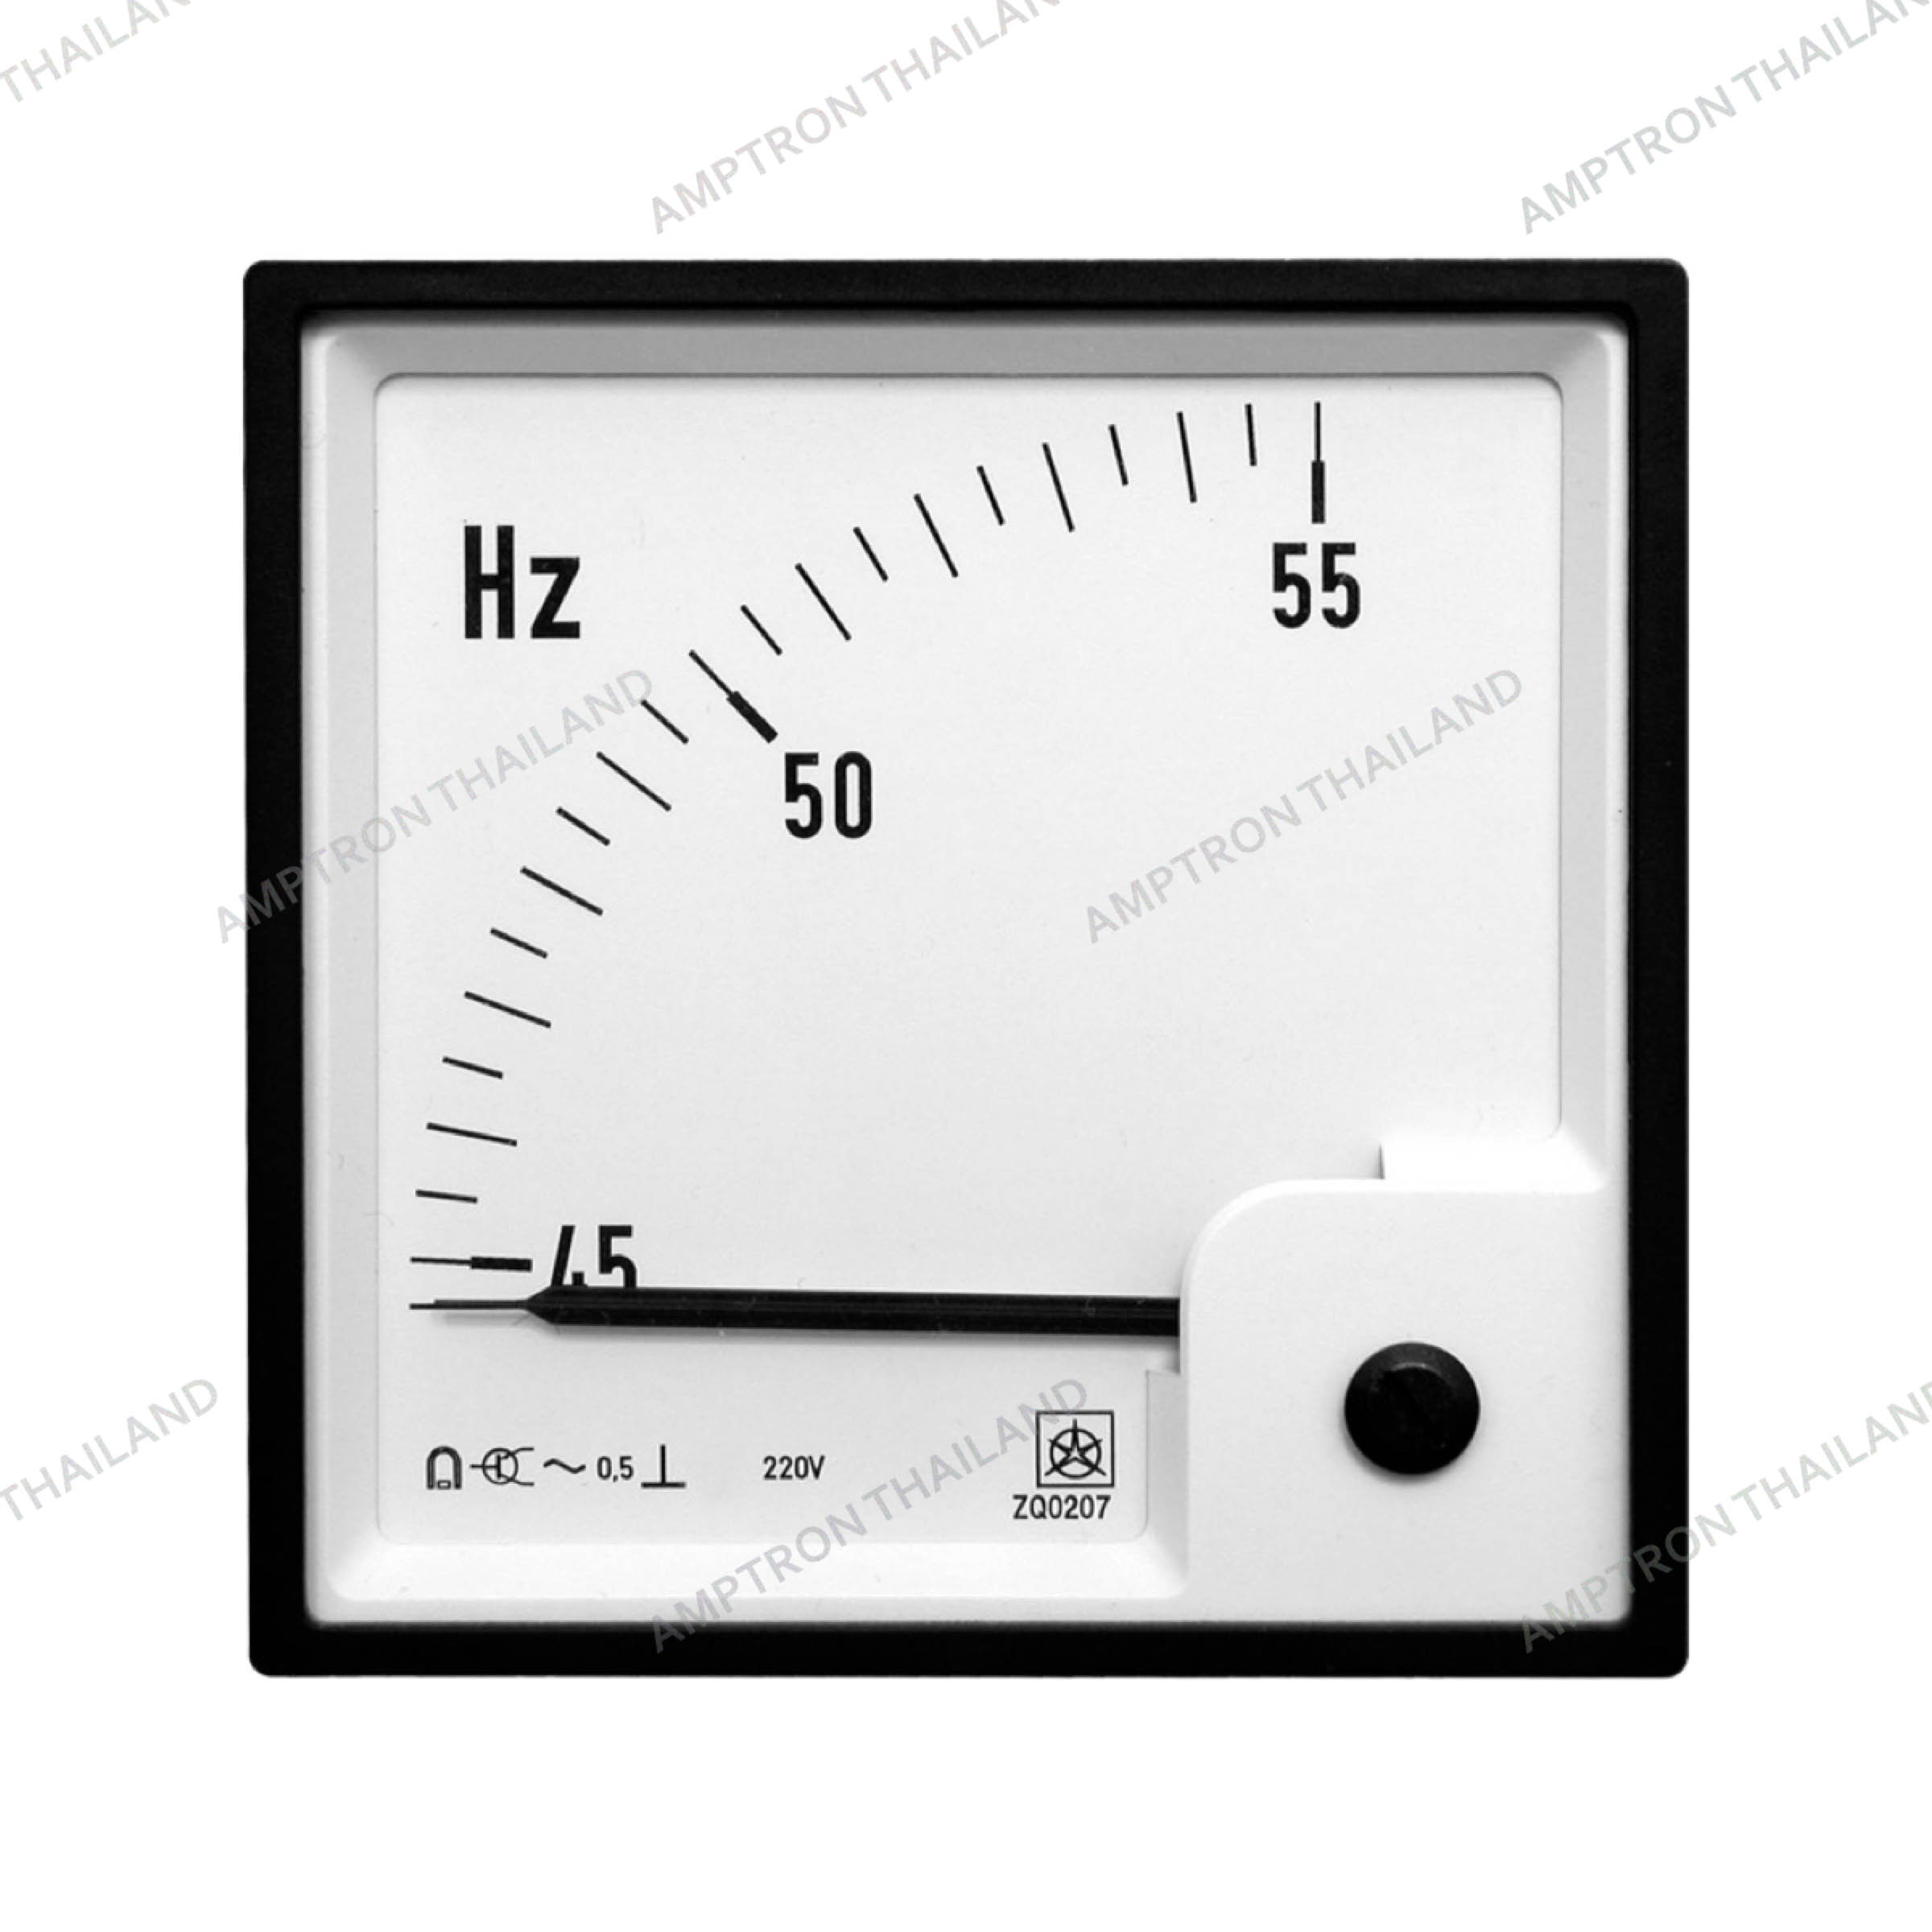 Moving Coil Frequency Meter Din panel, Analog meter